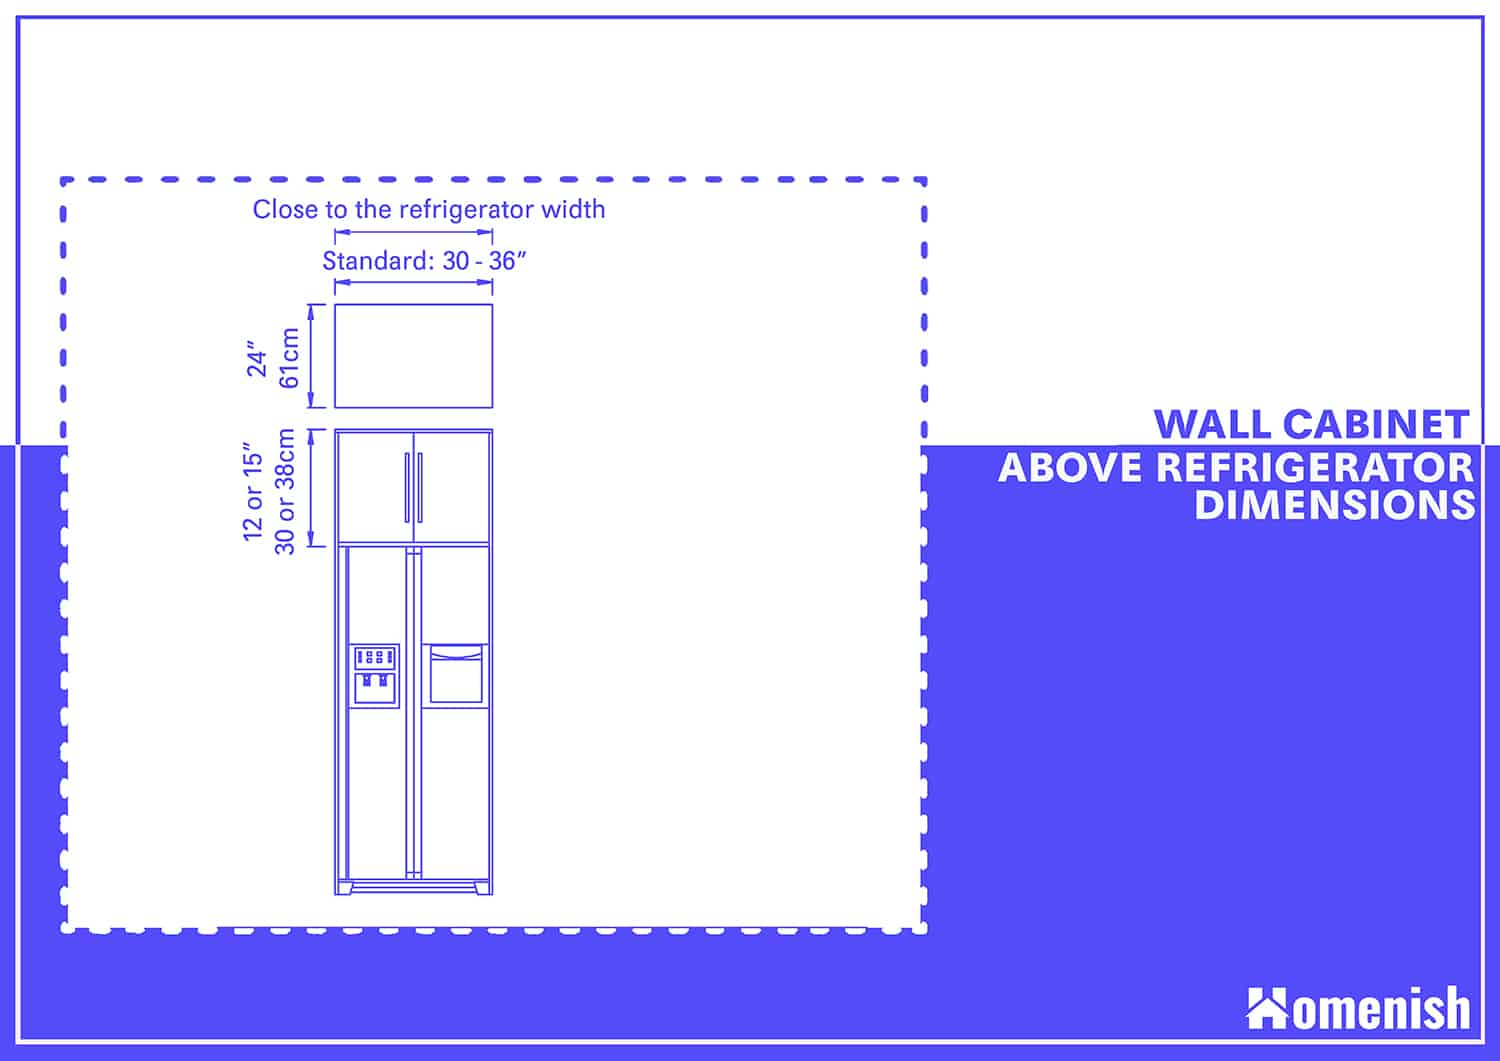 Kitchen Wall Cabinet Above Refrigerator Dimensions 